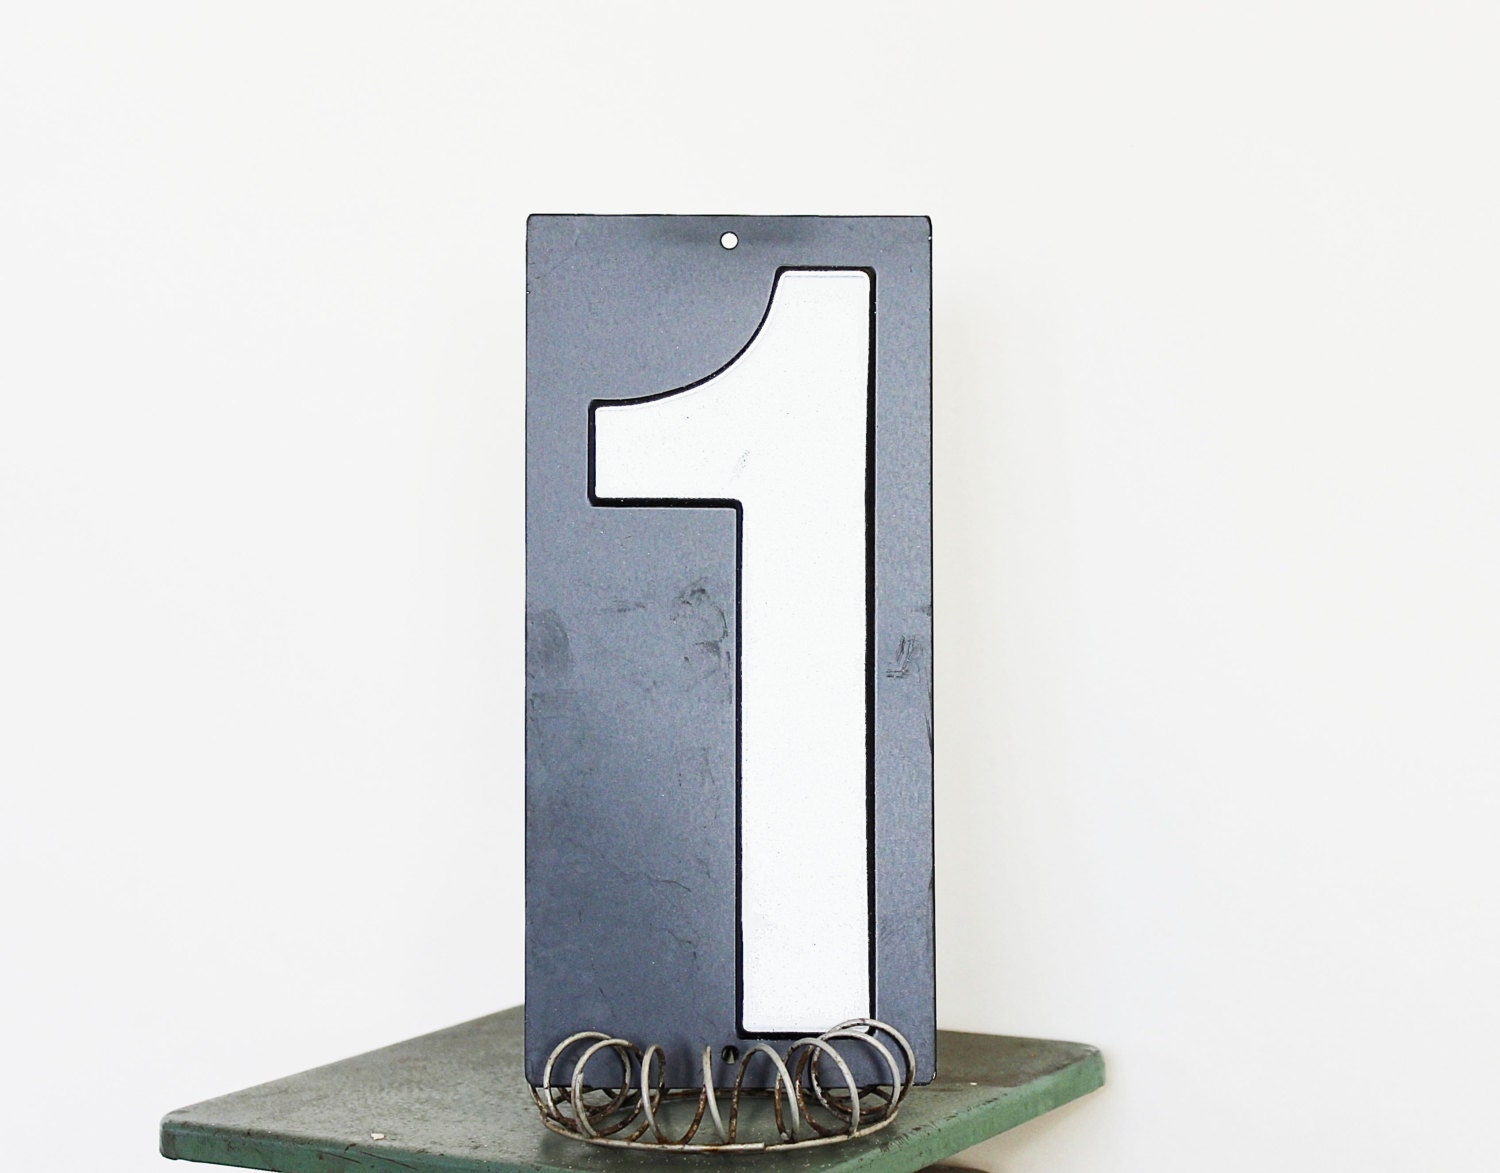 You're Number 1 - Vintage Metal Number Sign - Industrial - Black - One - Supplies - Reflective - becaruns